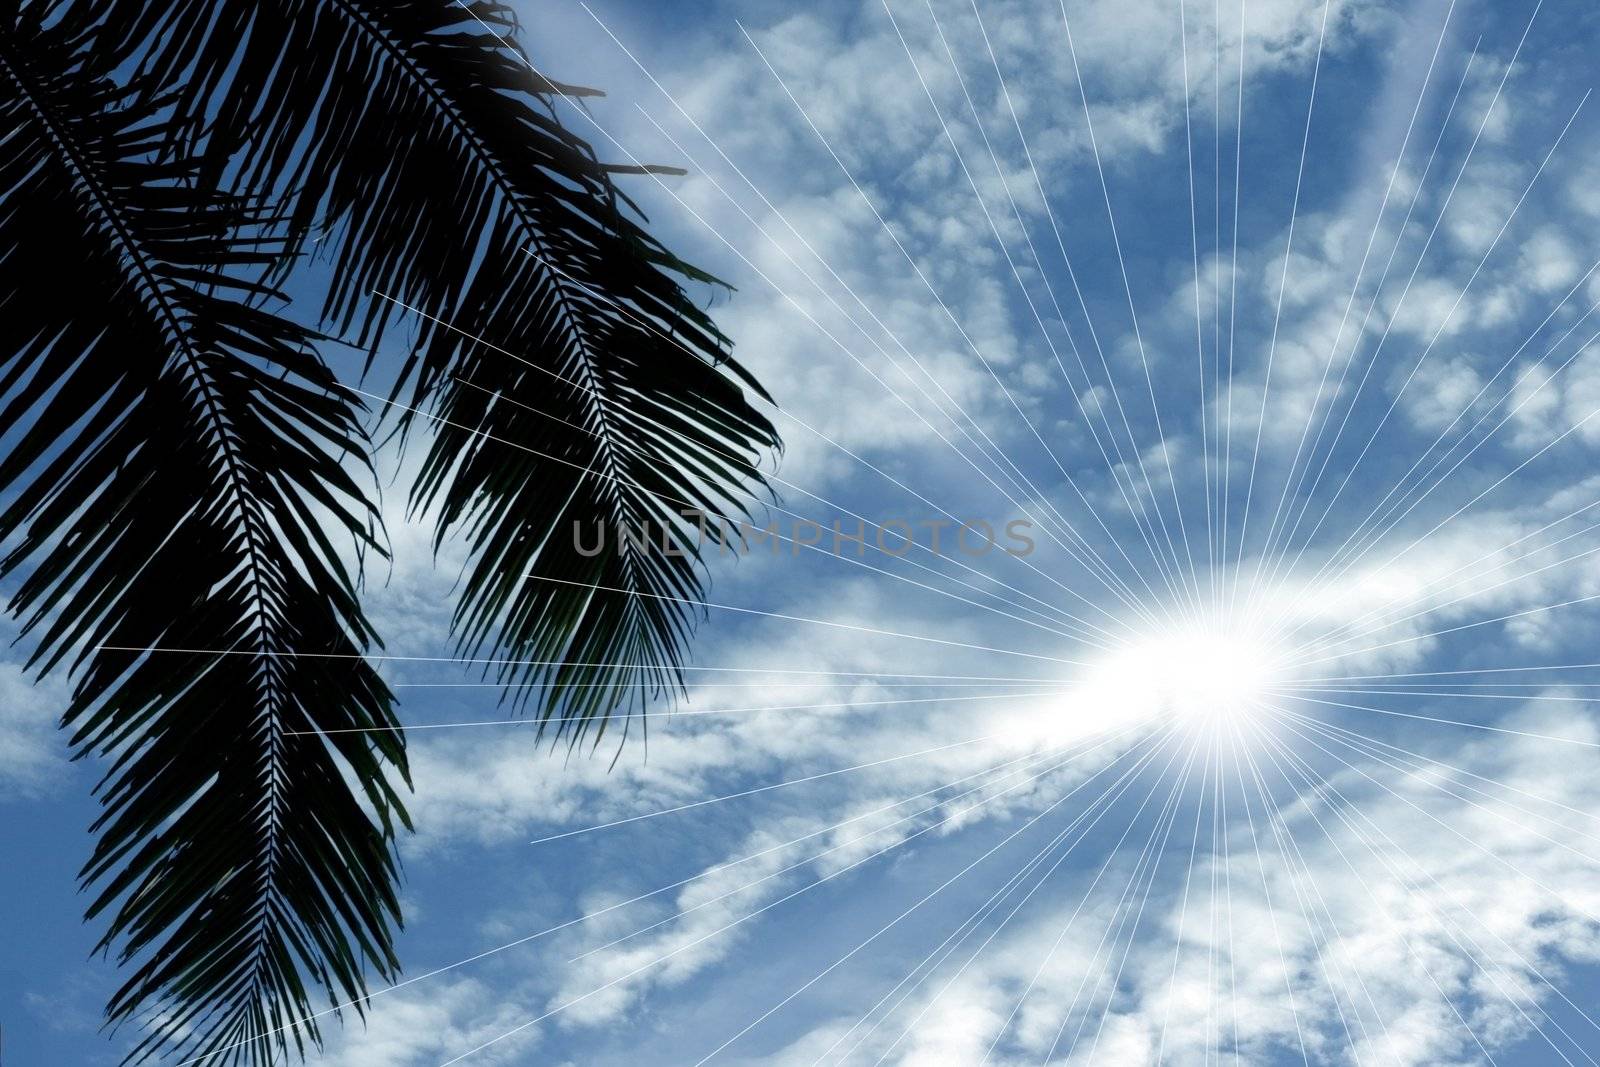 Coconut Palm Frond with Mystical Light by sacatani